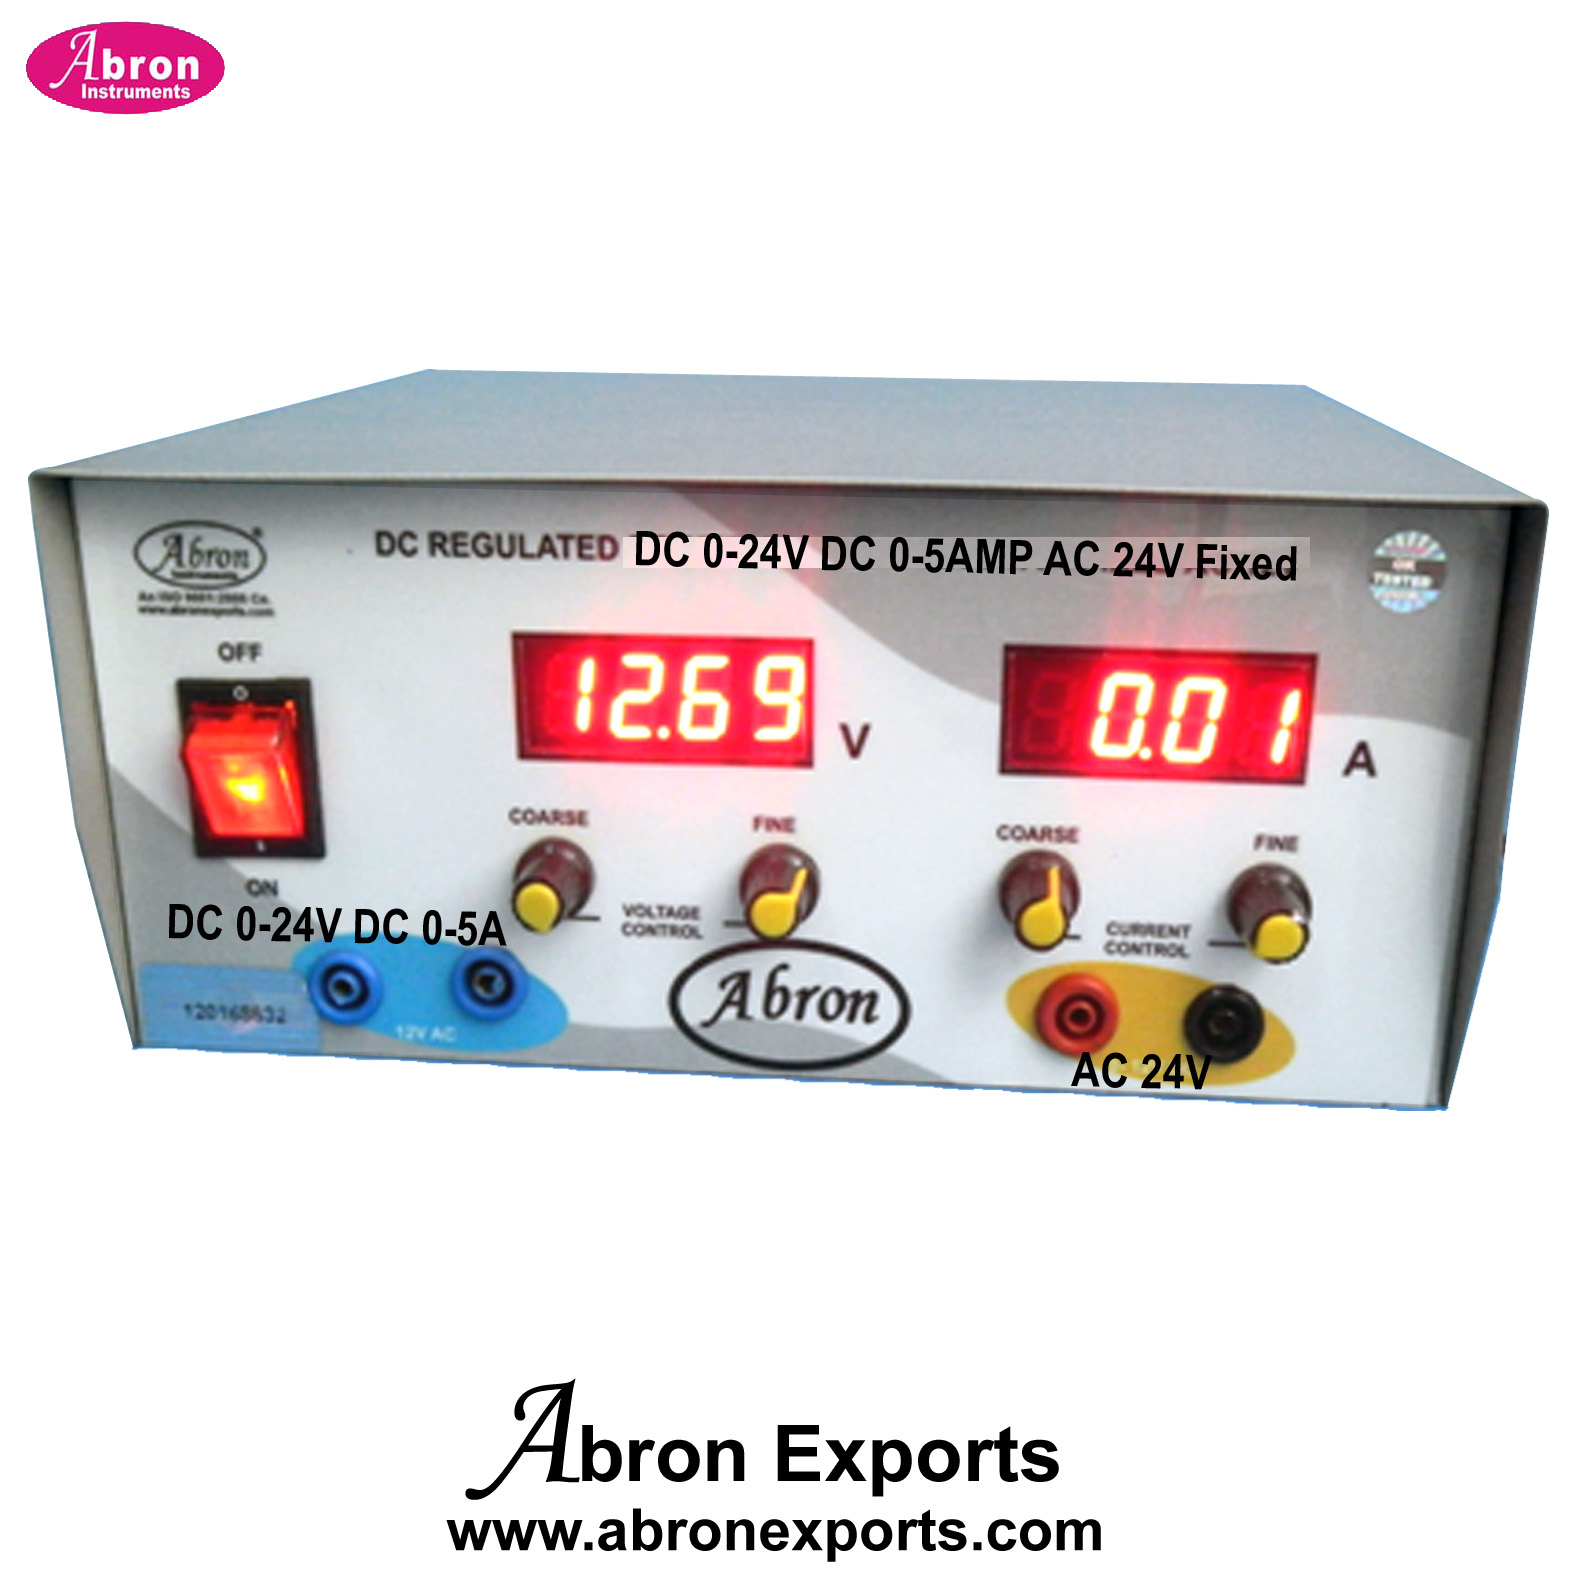 Power Supply 2 Digital Voltmeter Ammeter Dual AC DC 0-24VDC 0-5 AMP AC 24V Fixed Variable Abron AE-1375DACDC 